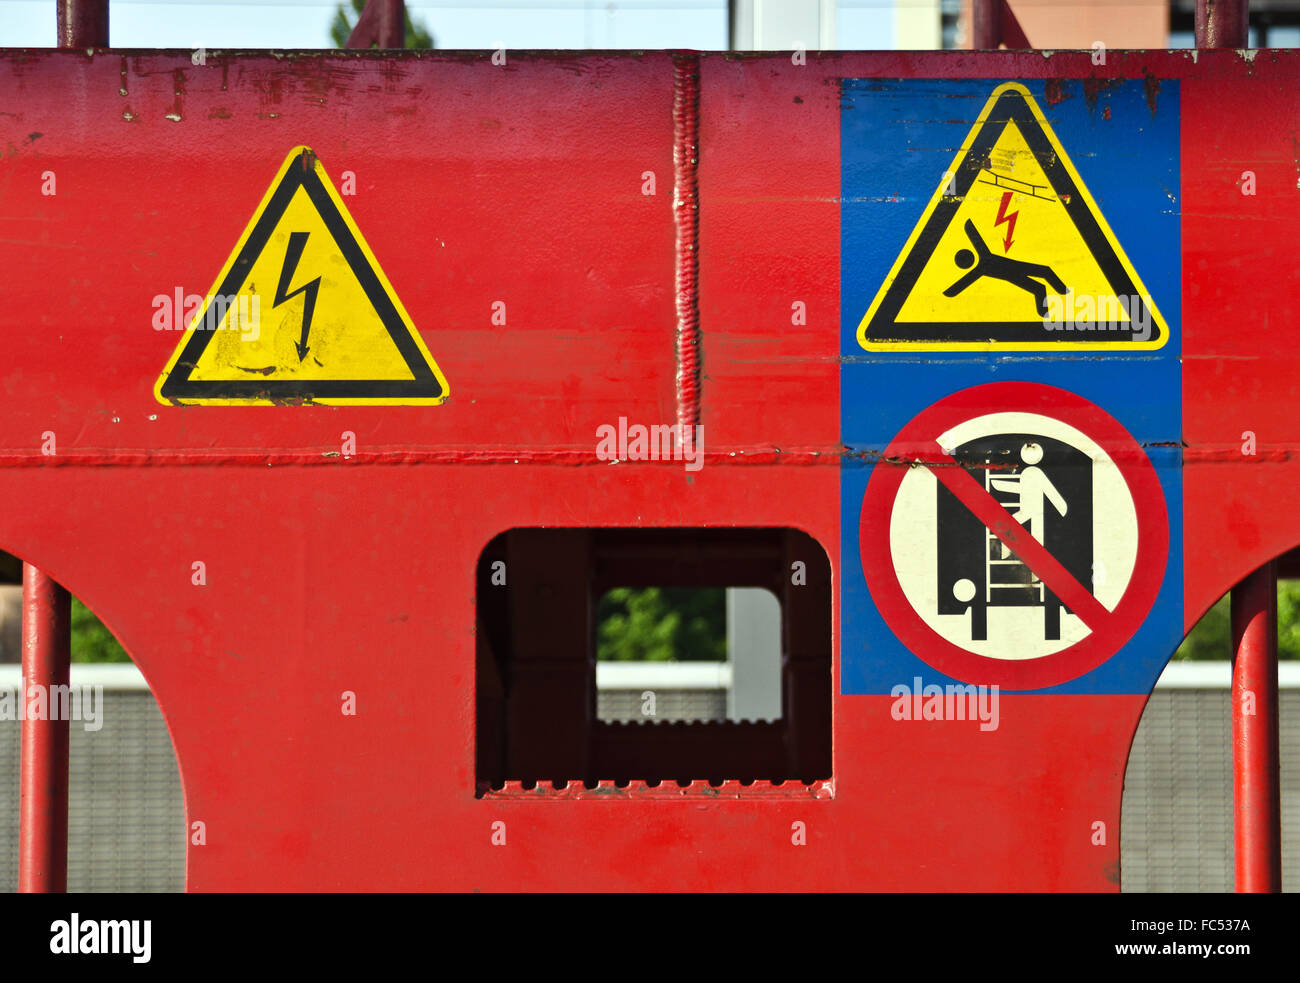 warning signs at a red painted train waggon Stock Photo